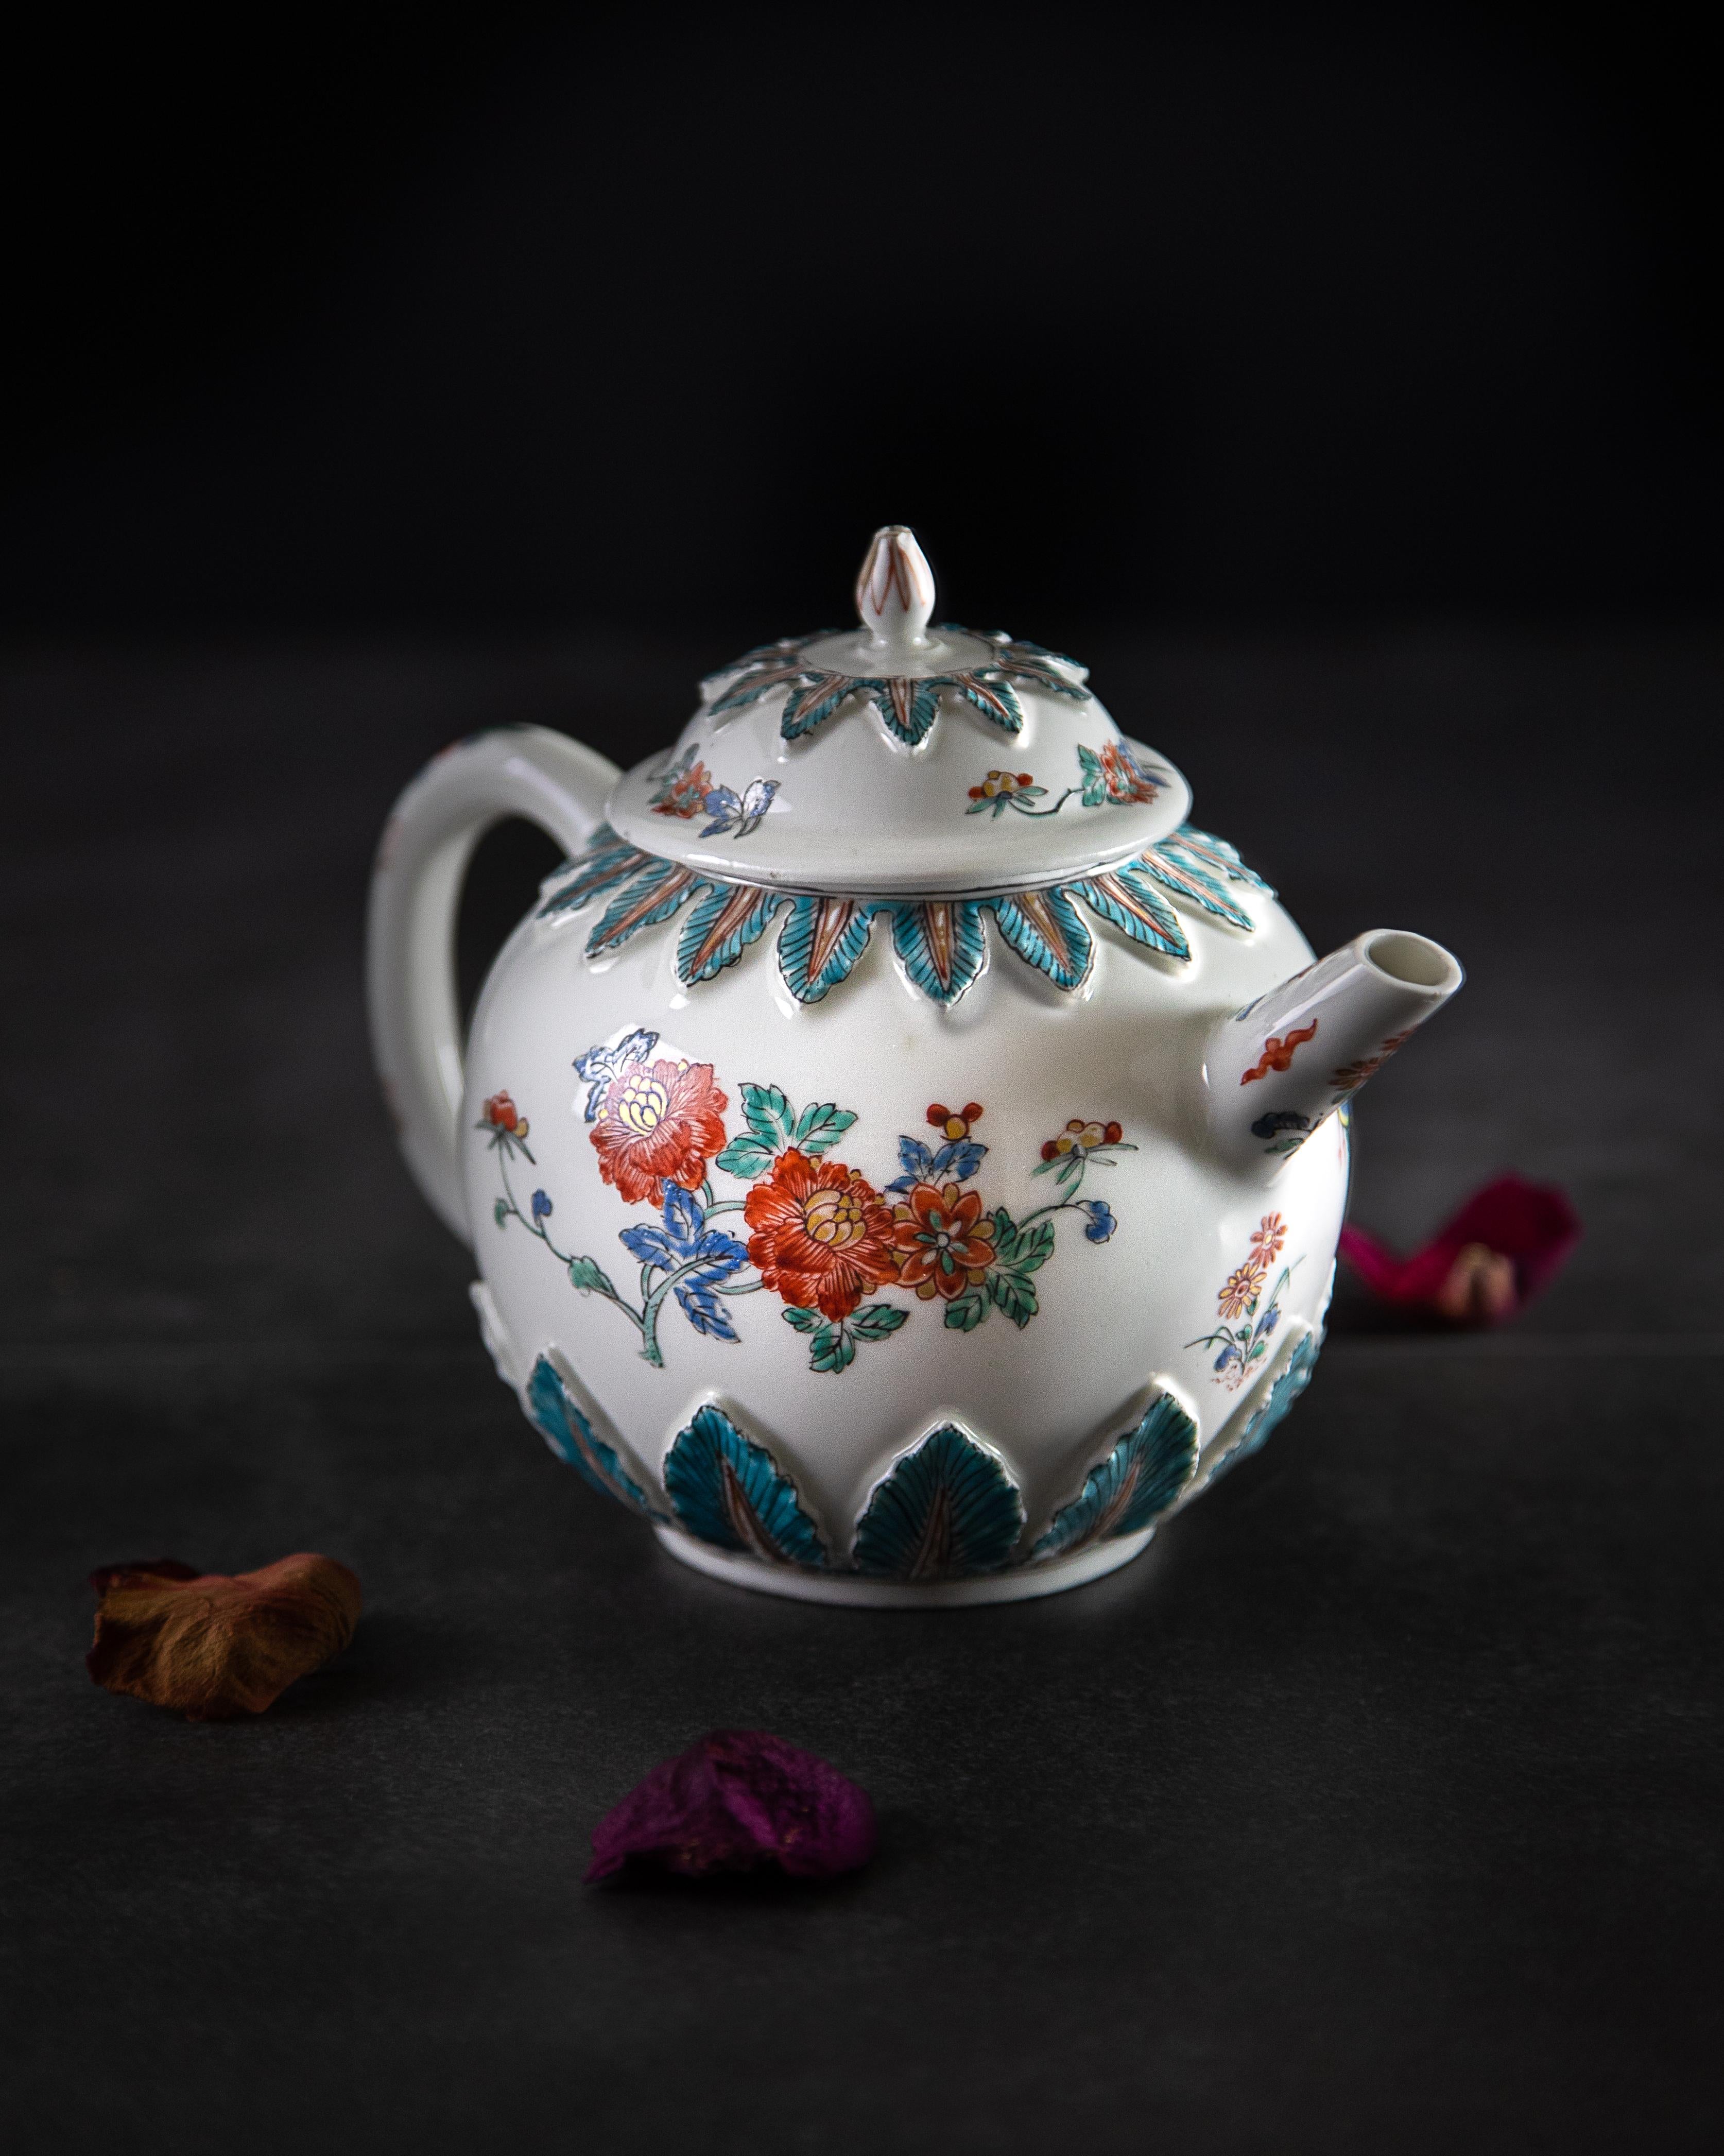 An early Meissen porcelain teapot made circa 1715, decorated by a Dutch hausmaler circa 1730-1740.

The teapot is decorated in a Kakiemon palette of turquoise, red, blue and yellow and enriched with gilding. The short, tapering spout and loop